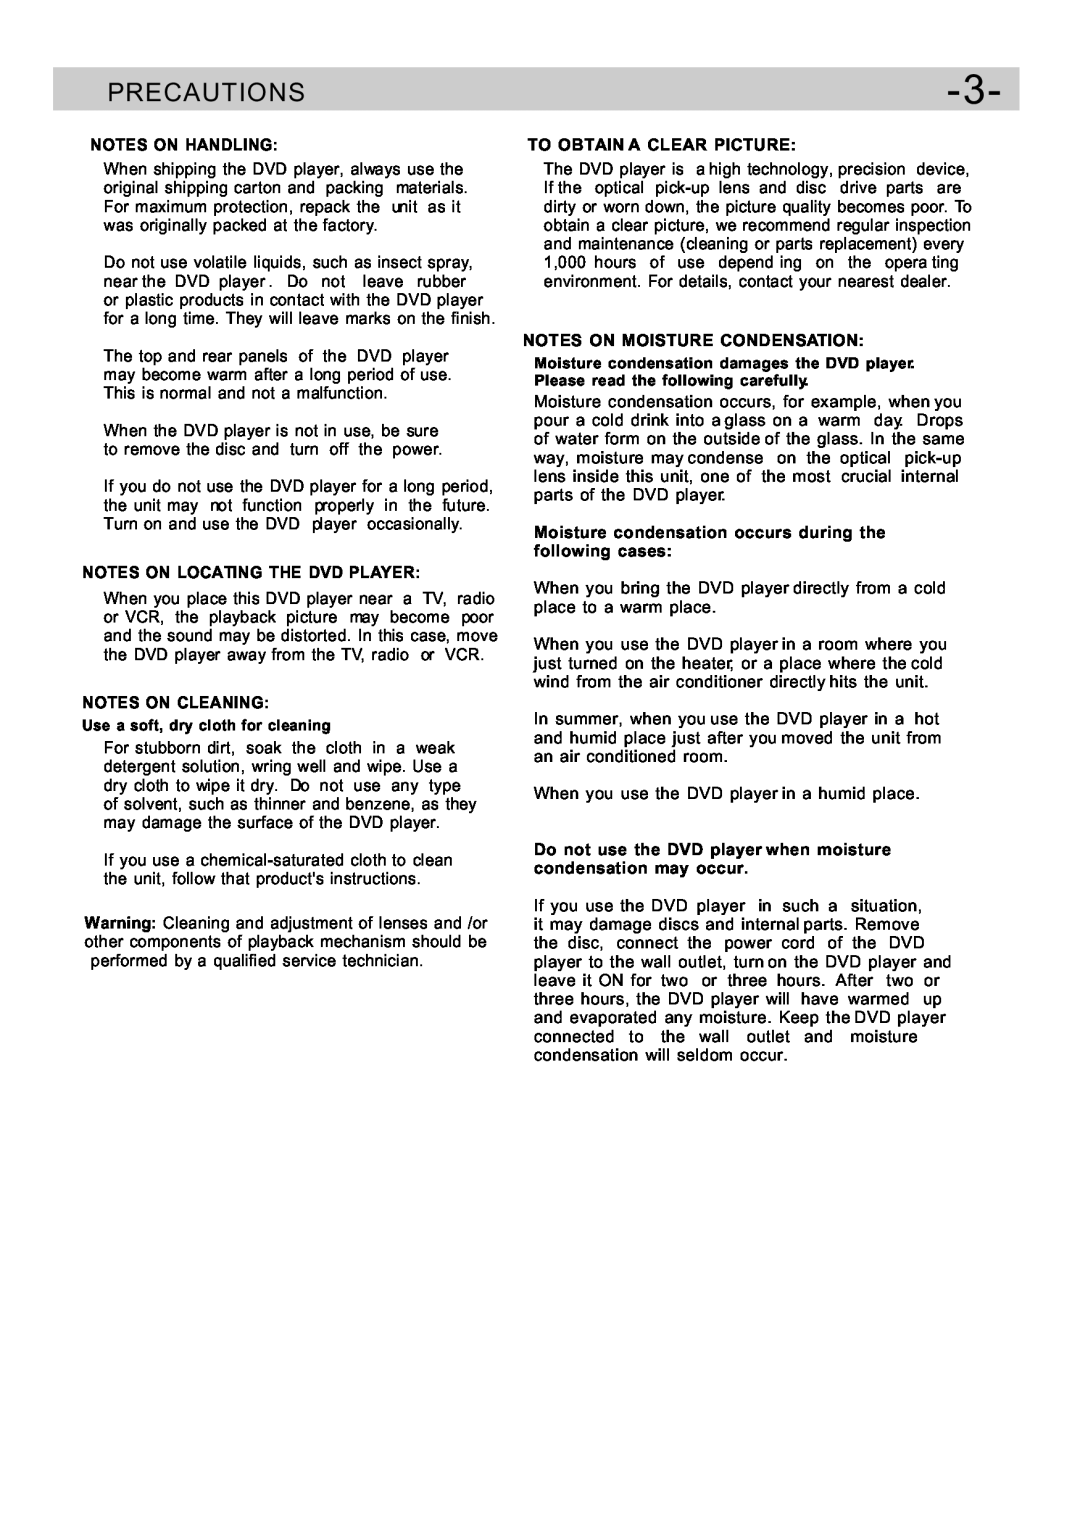 Curtis DVD5091UK user manual Precautions, Notes On Handling, Notes On Locating The Dvd Player, Notes On Cleaning 